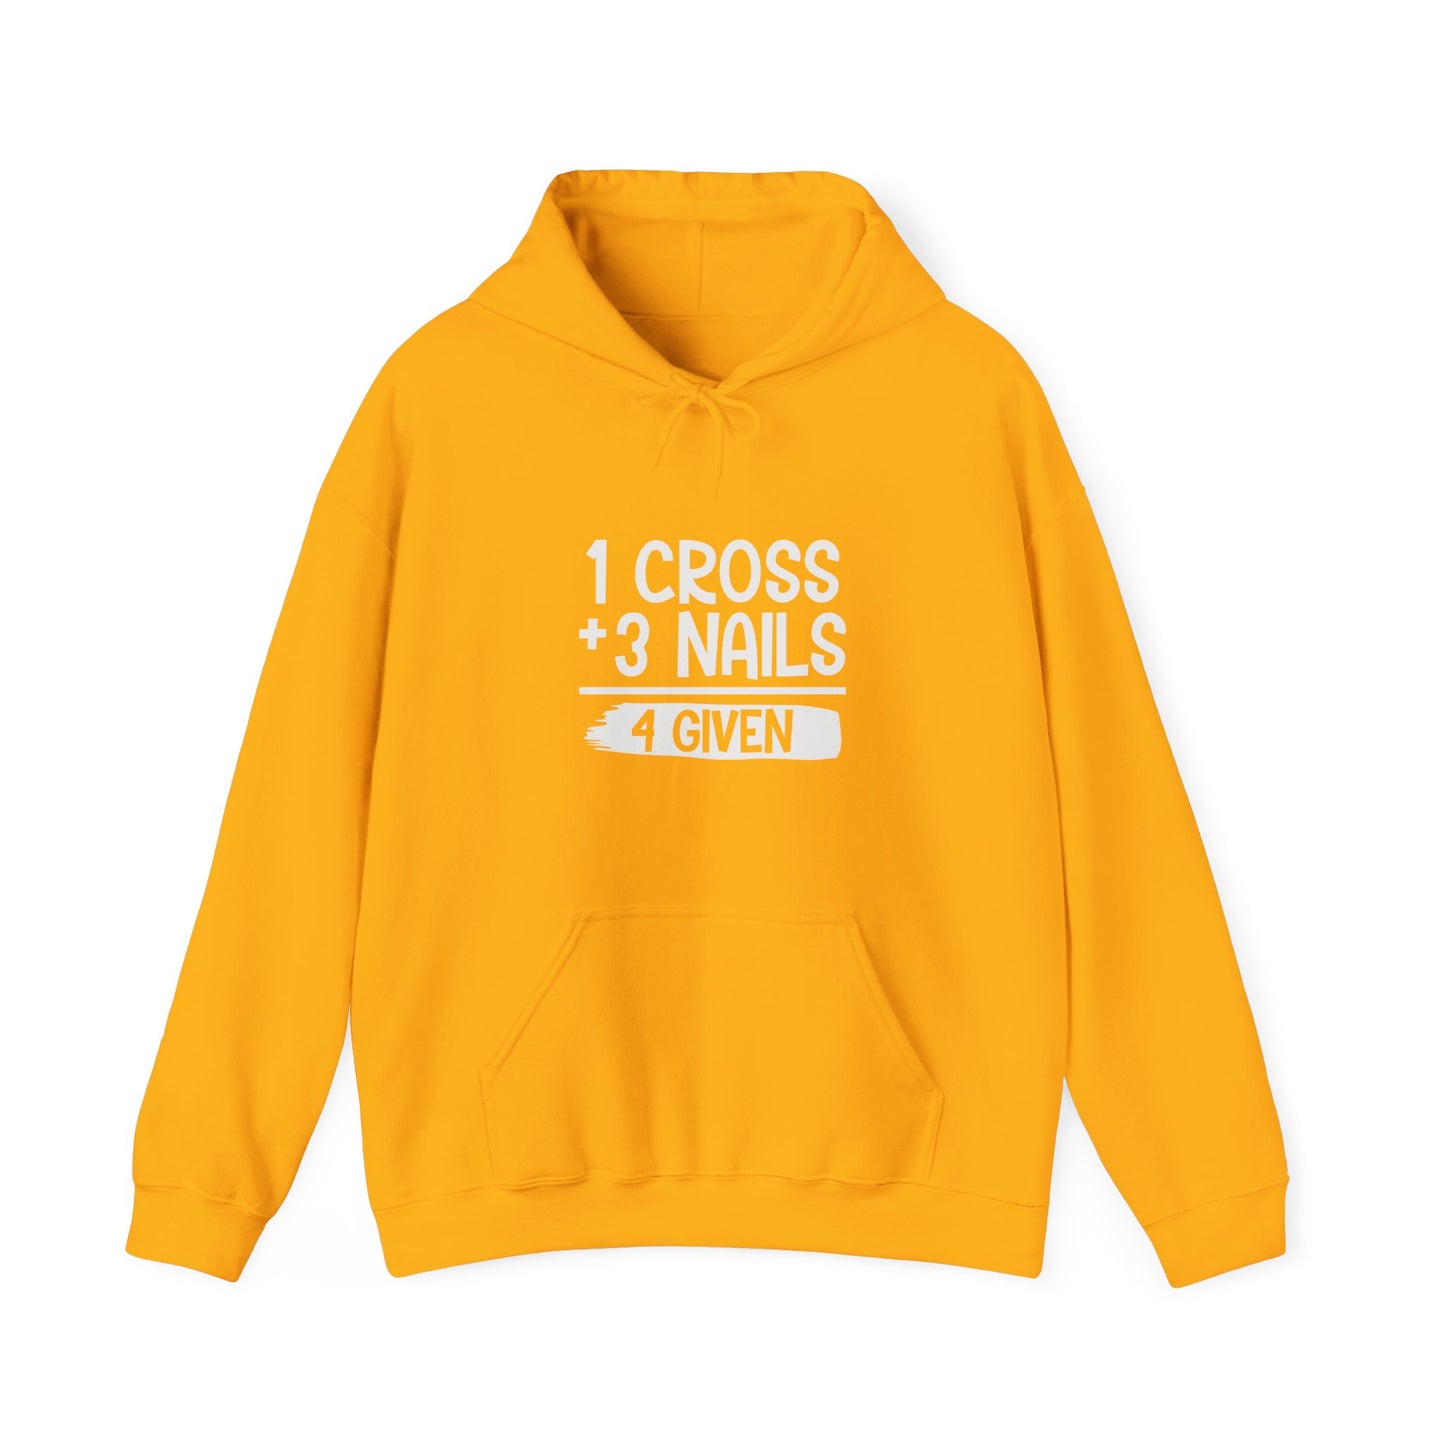 1 Cross Plus 3 Nails 4 Given  Unisex Christian Hooded Pullover Sweatshirt